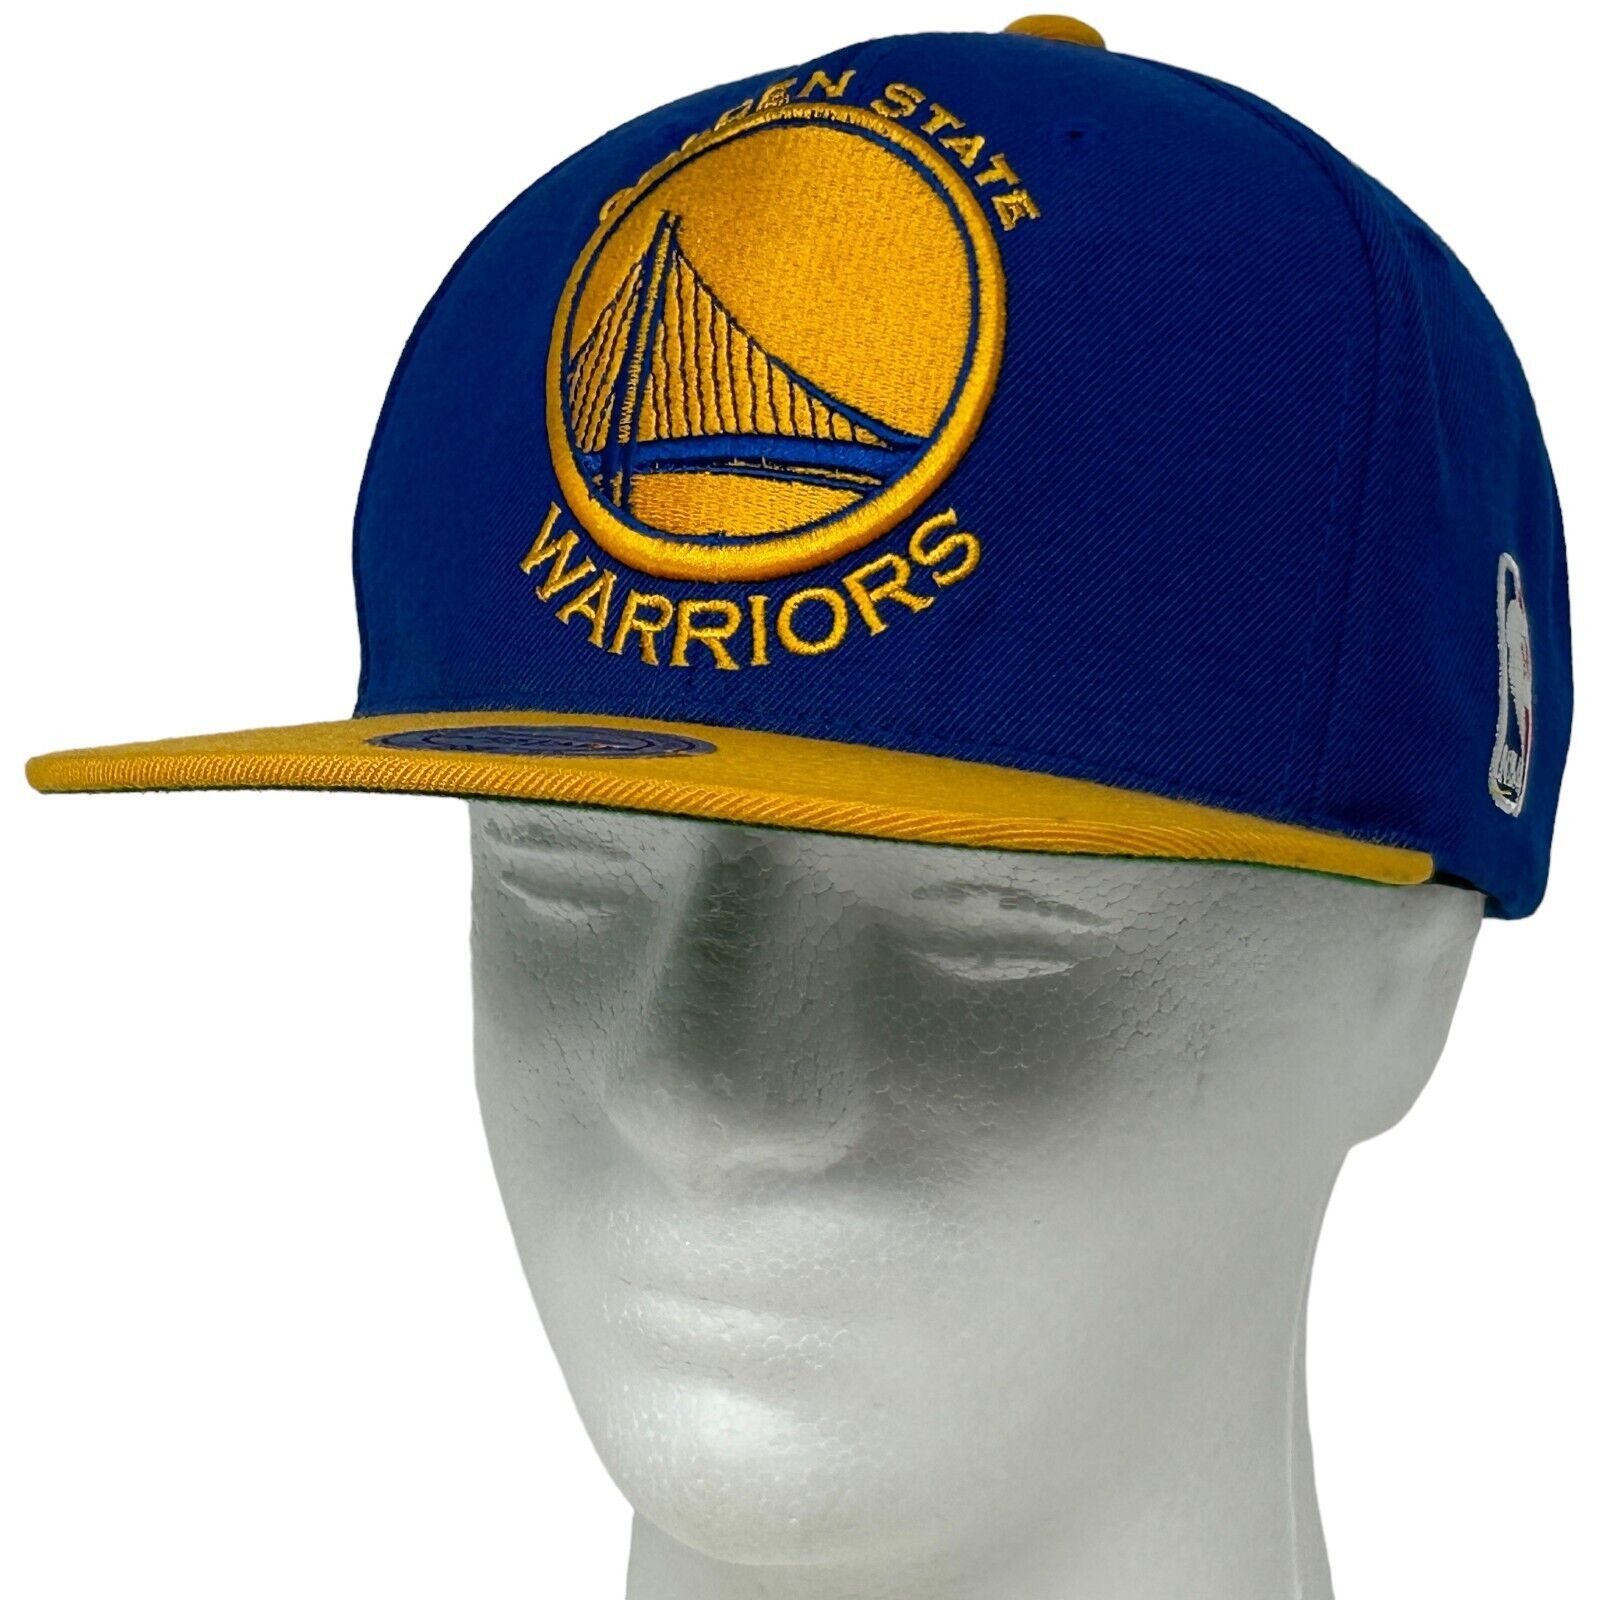 Mitchell & Ness Golden State Warriors Hat Blue Yellow NBA Baseball Cap Size ONE SIZE - 1 Preview